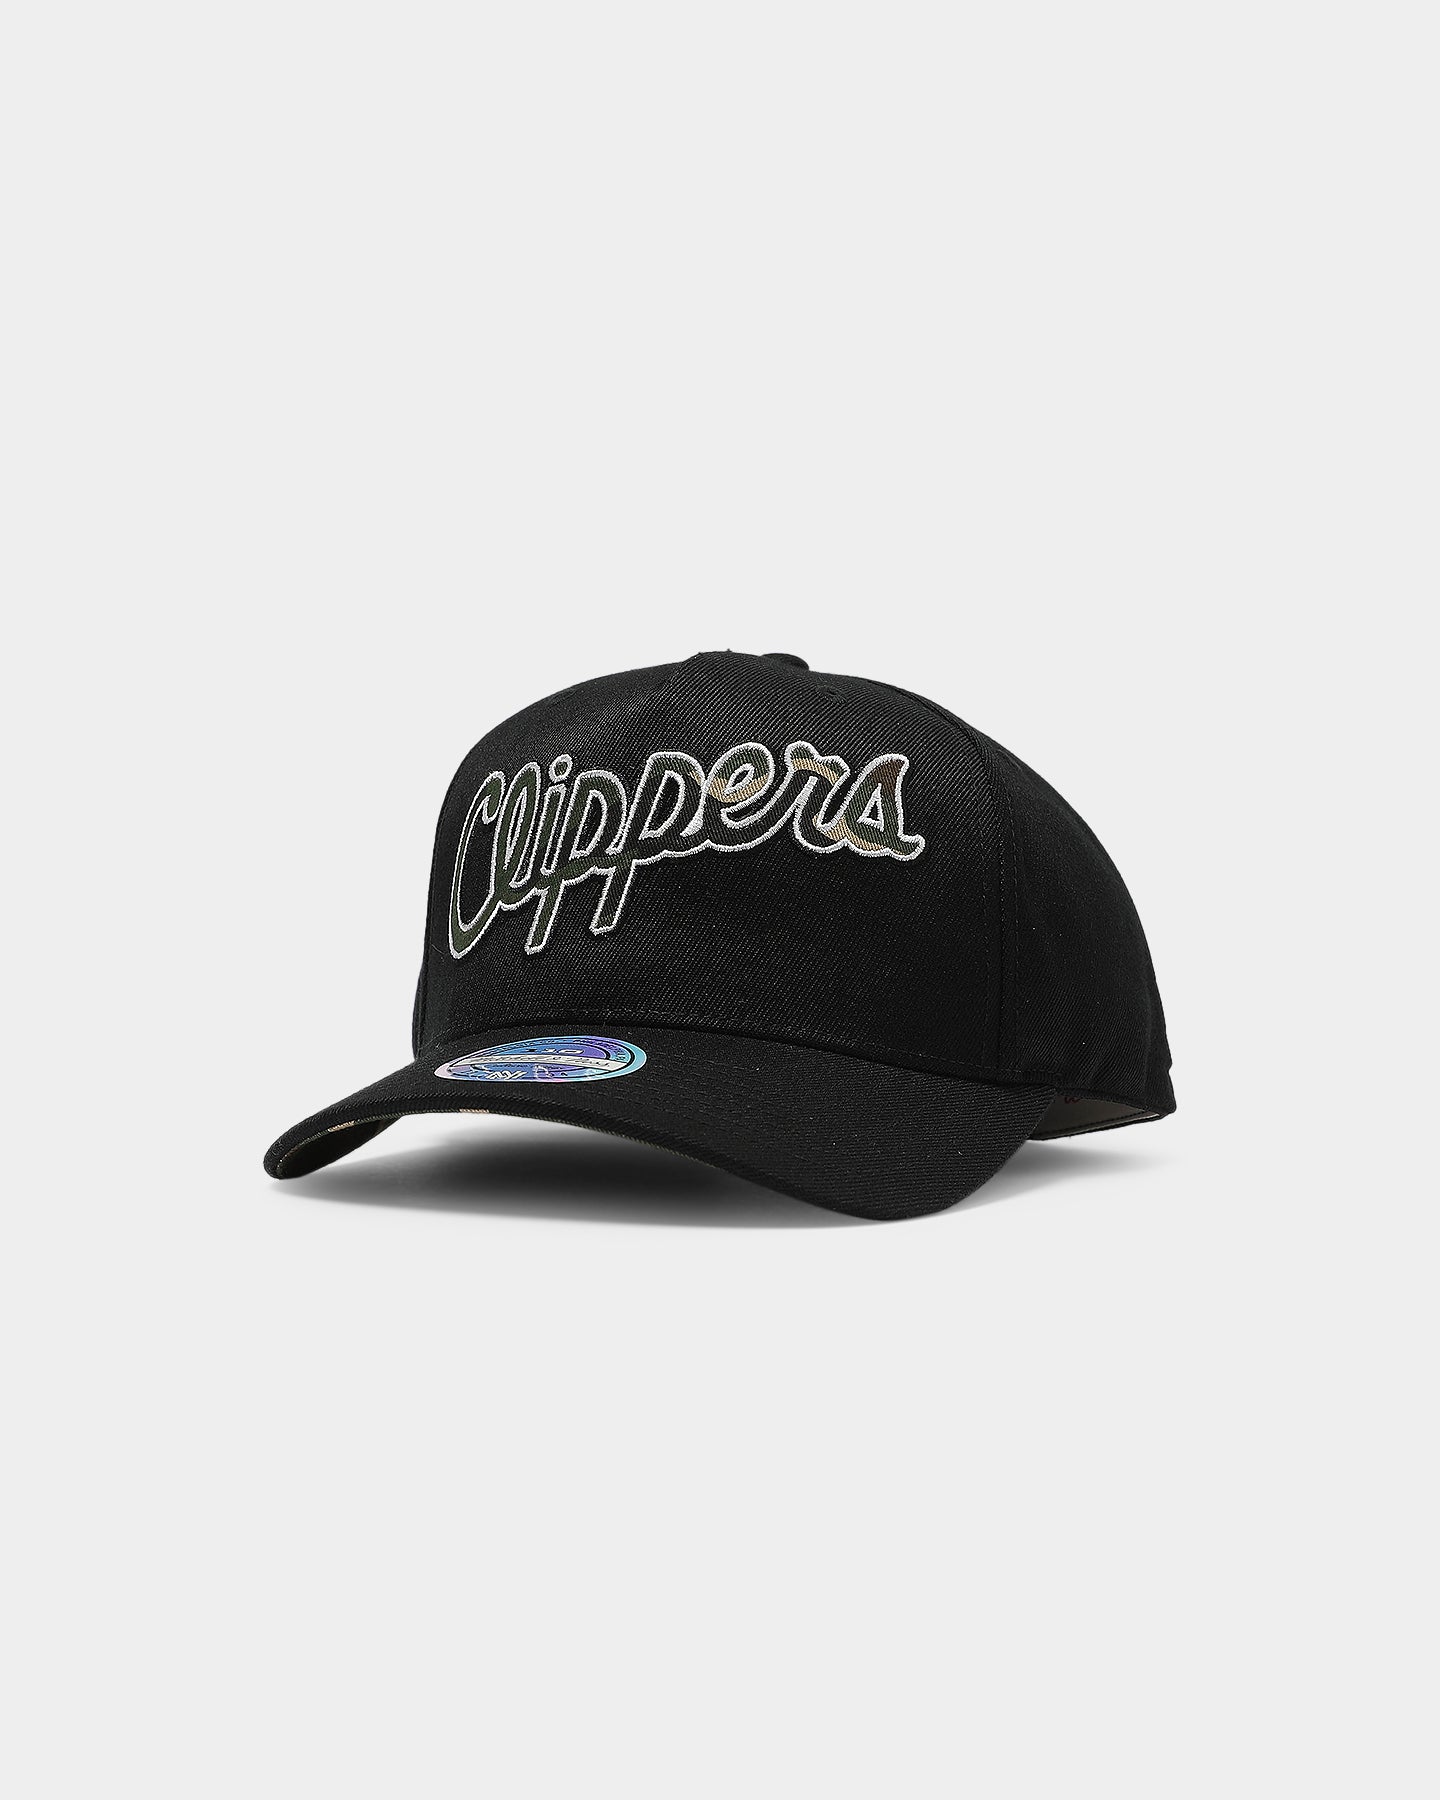 clippers mitchell and ness